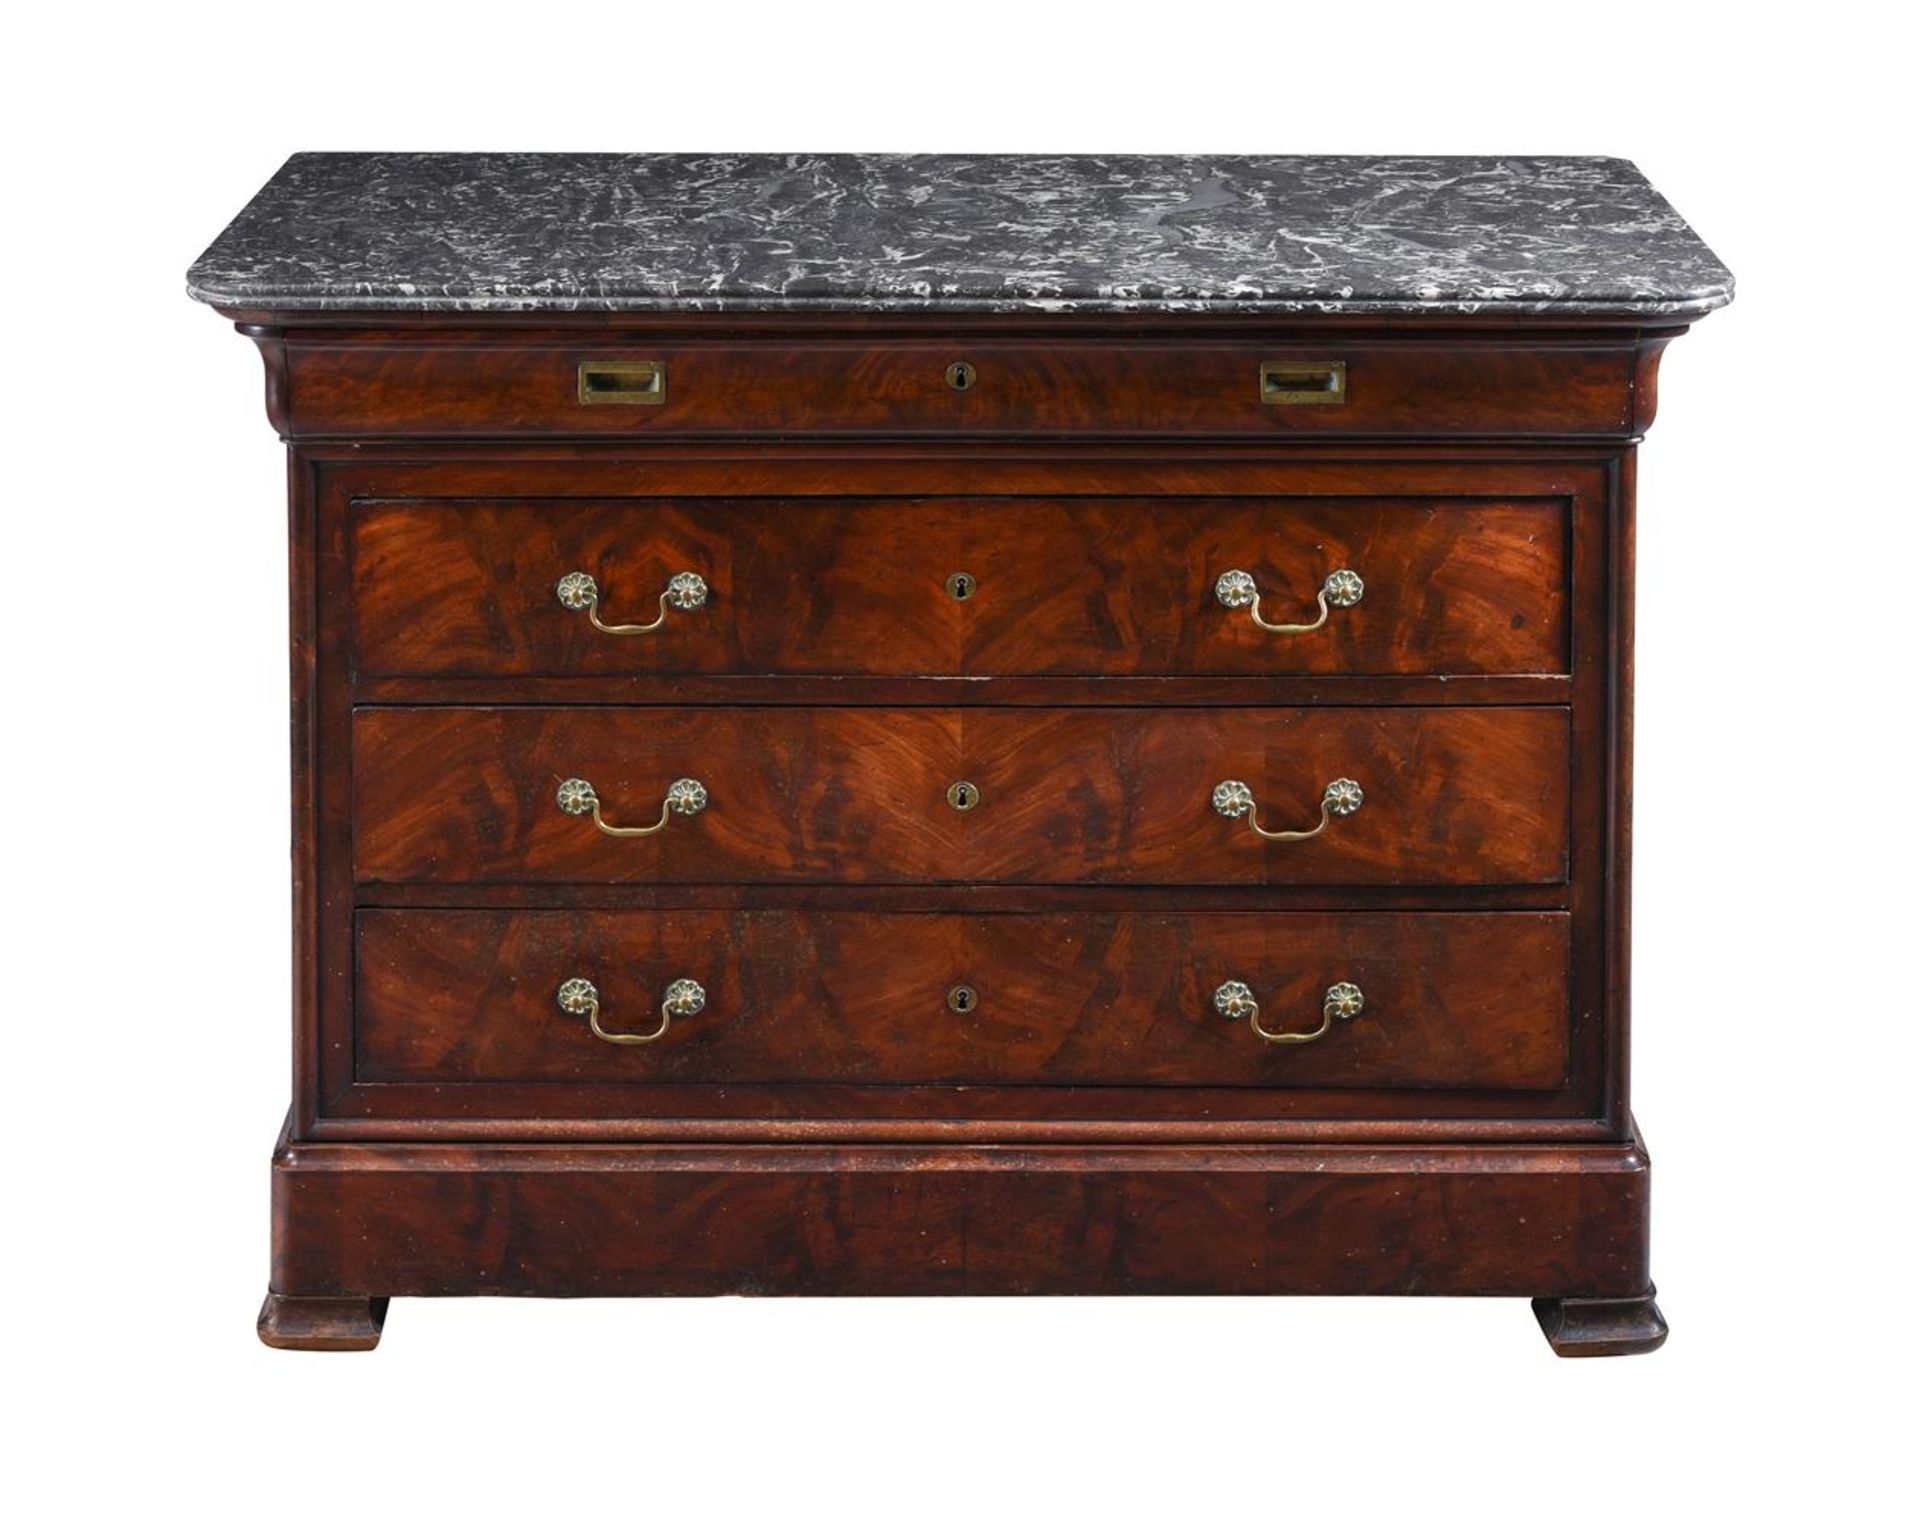 A LOUIS-PHILIPPE MAHOGANY AND MARBLE TOPPED COMMODE OR CHEST OF DRAWERS